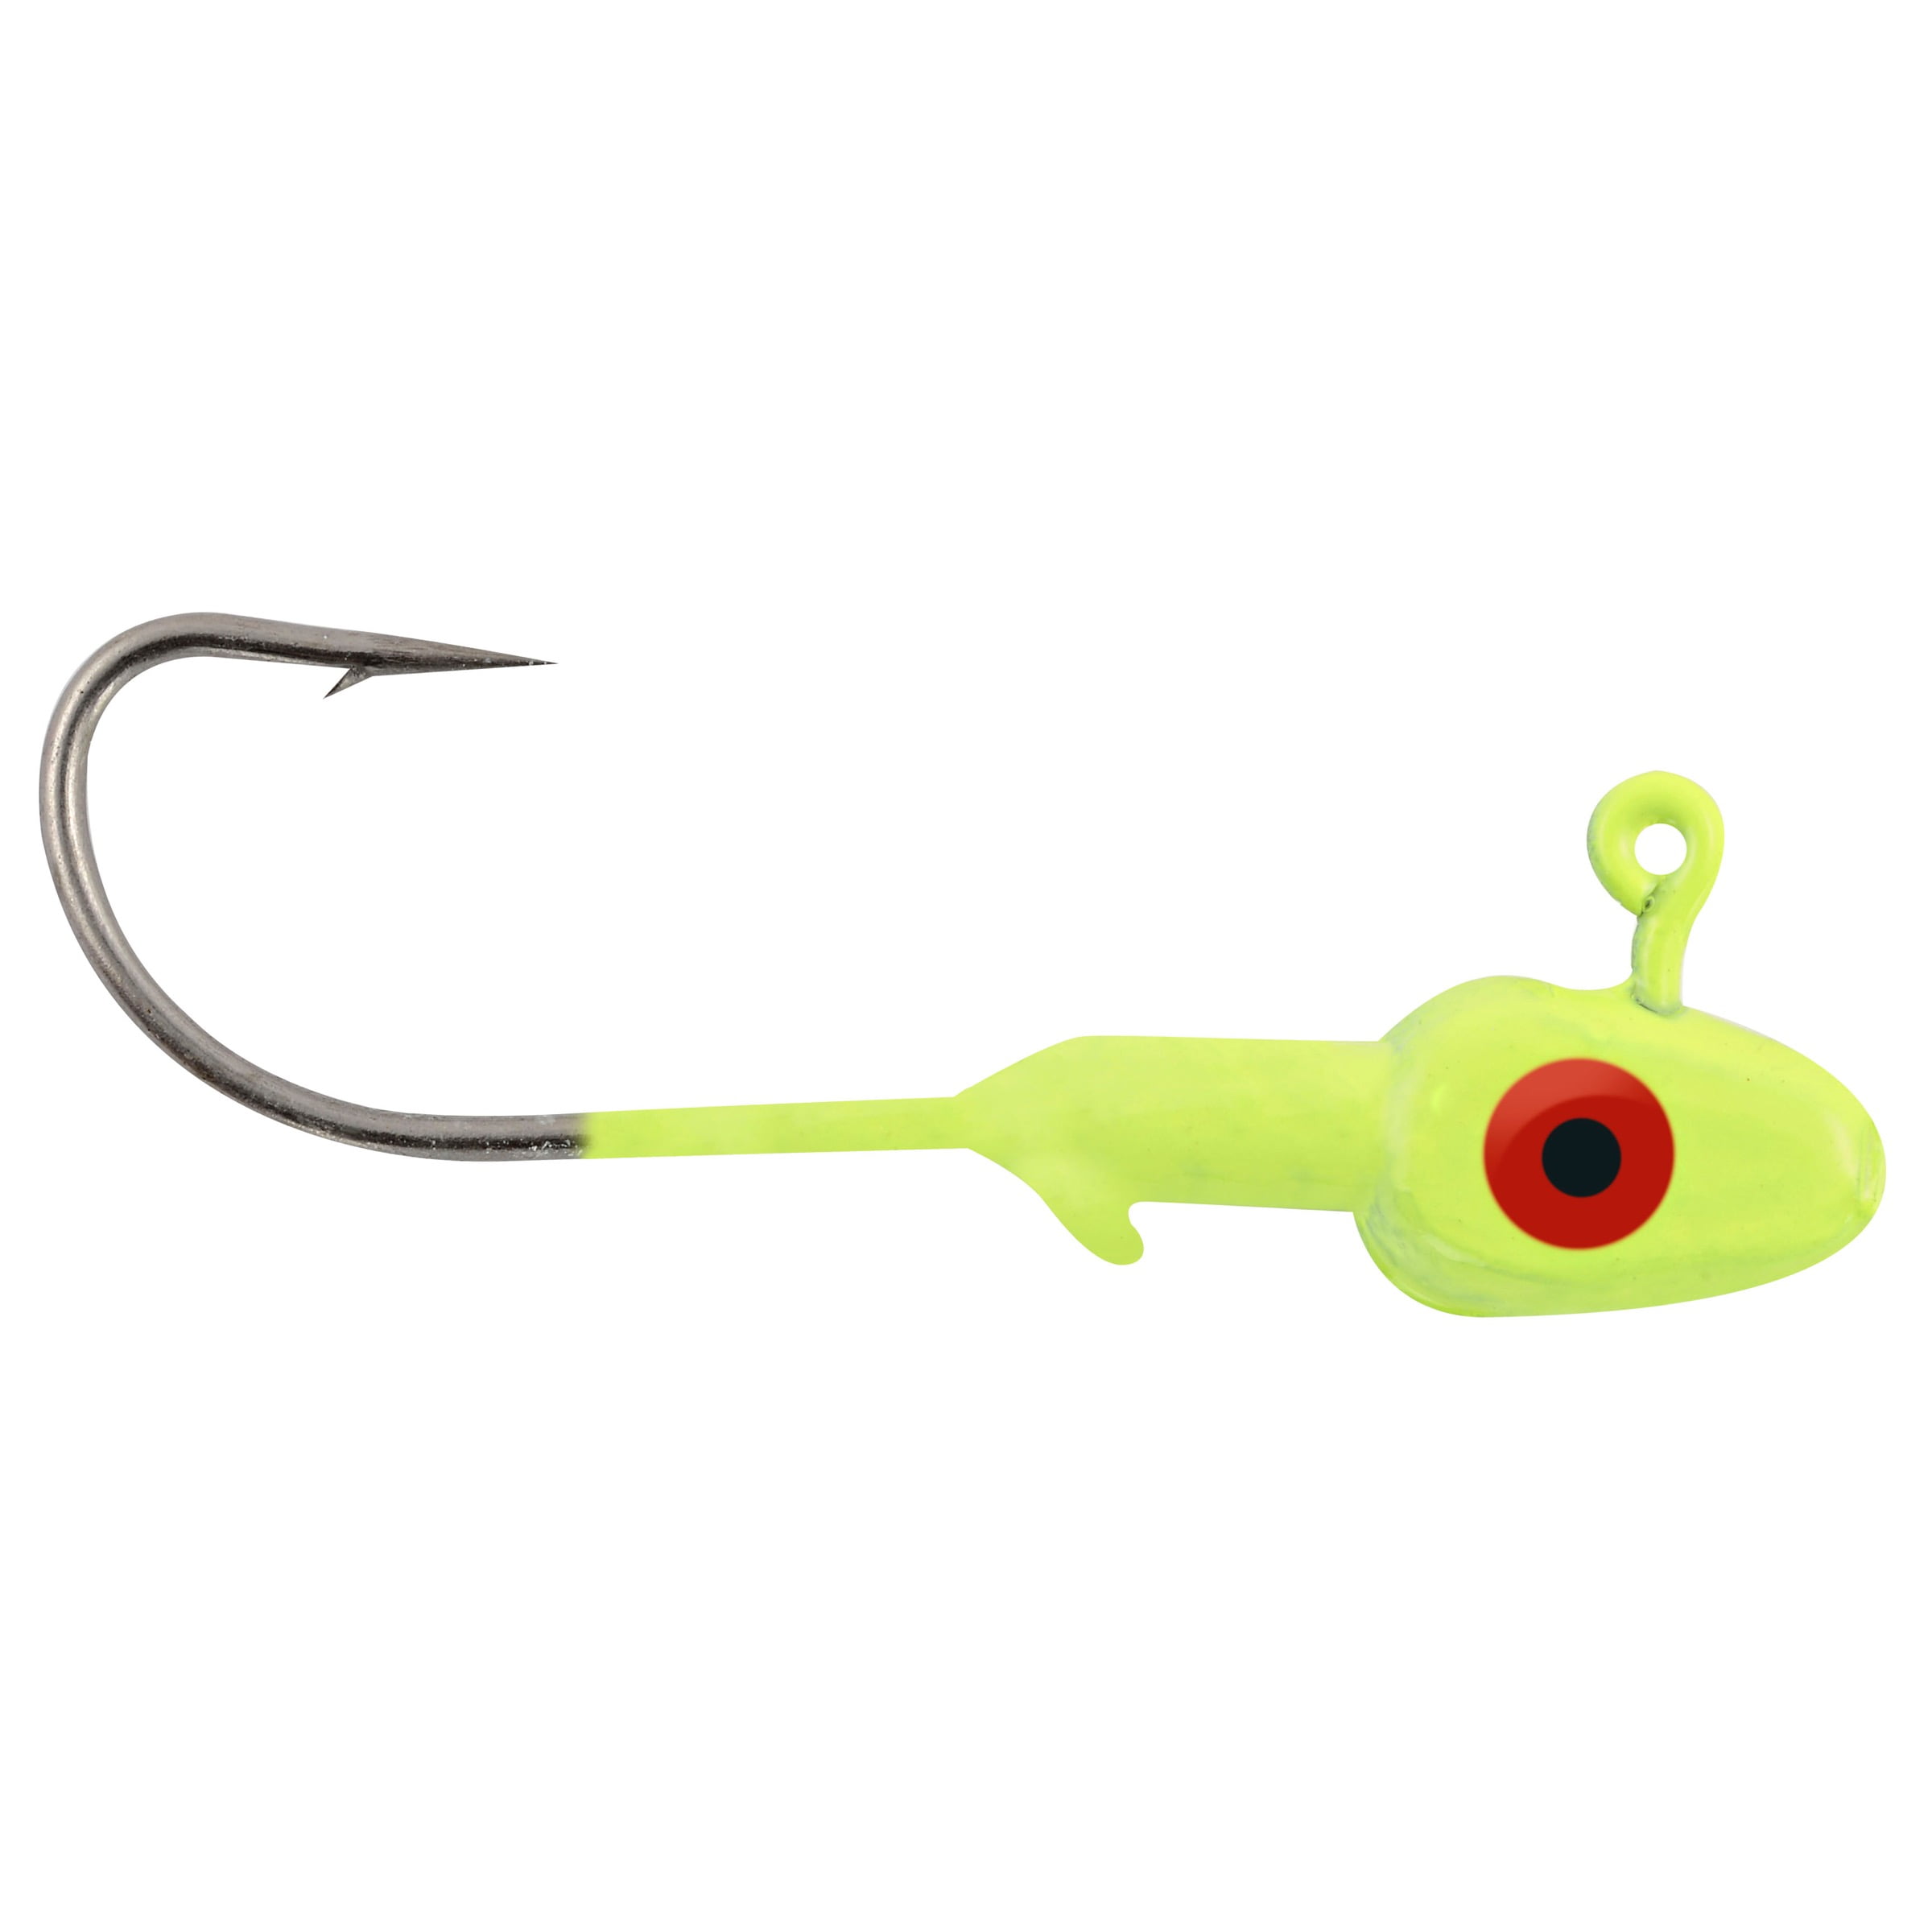 BANANA JIG with a WIRE TRAILER HOOK 4-1/4oz Fl YELLOW CHARTREUSE 